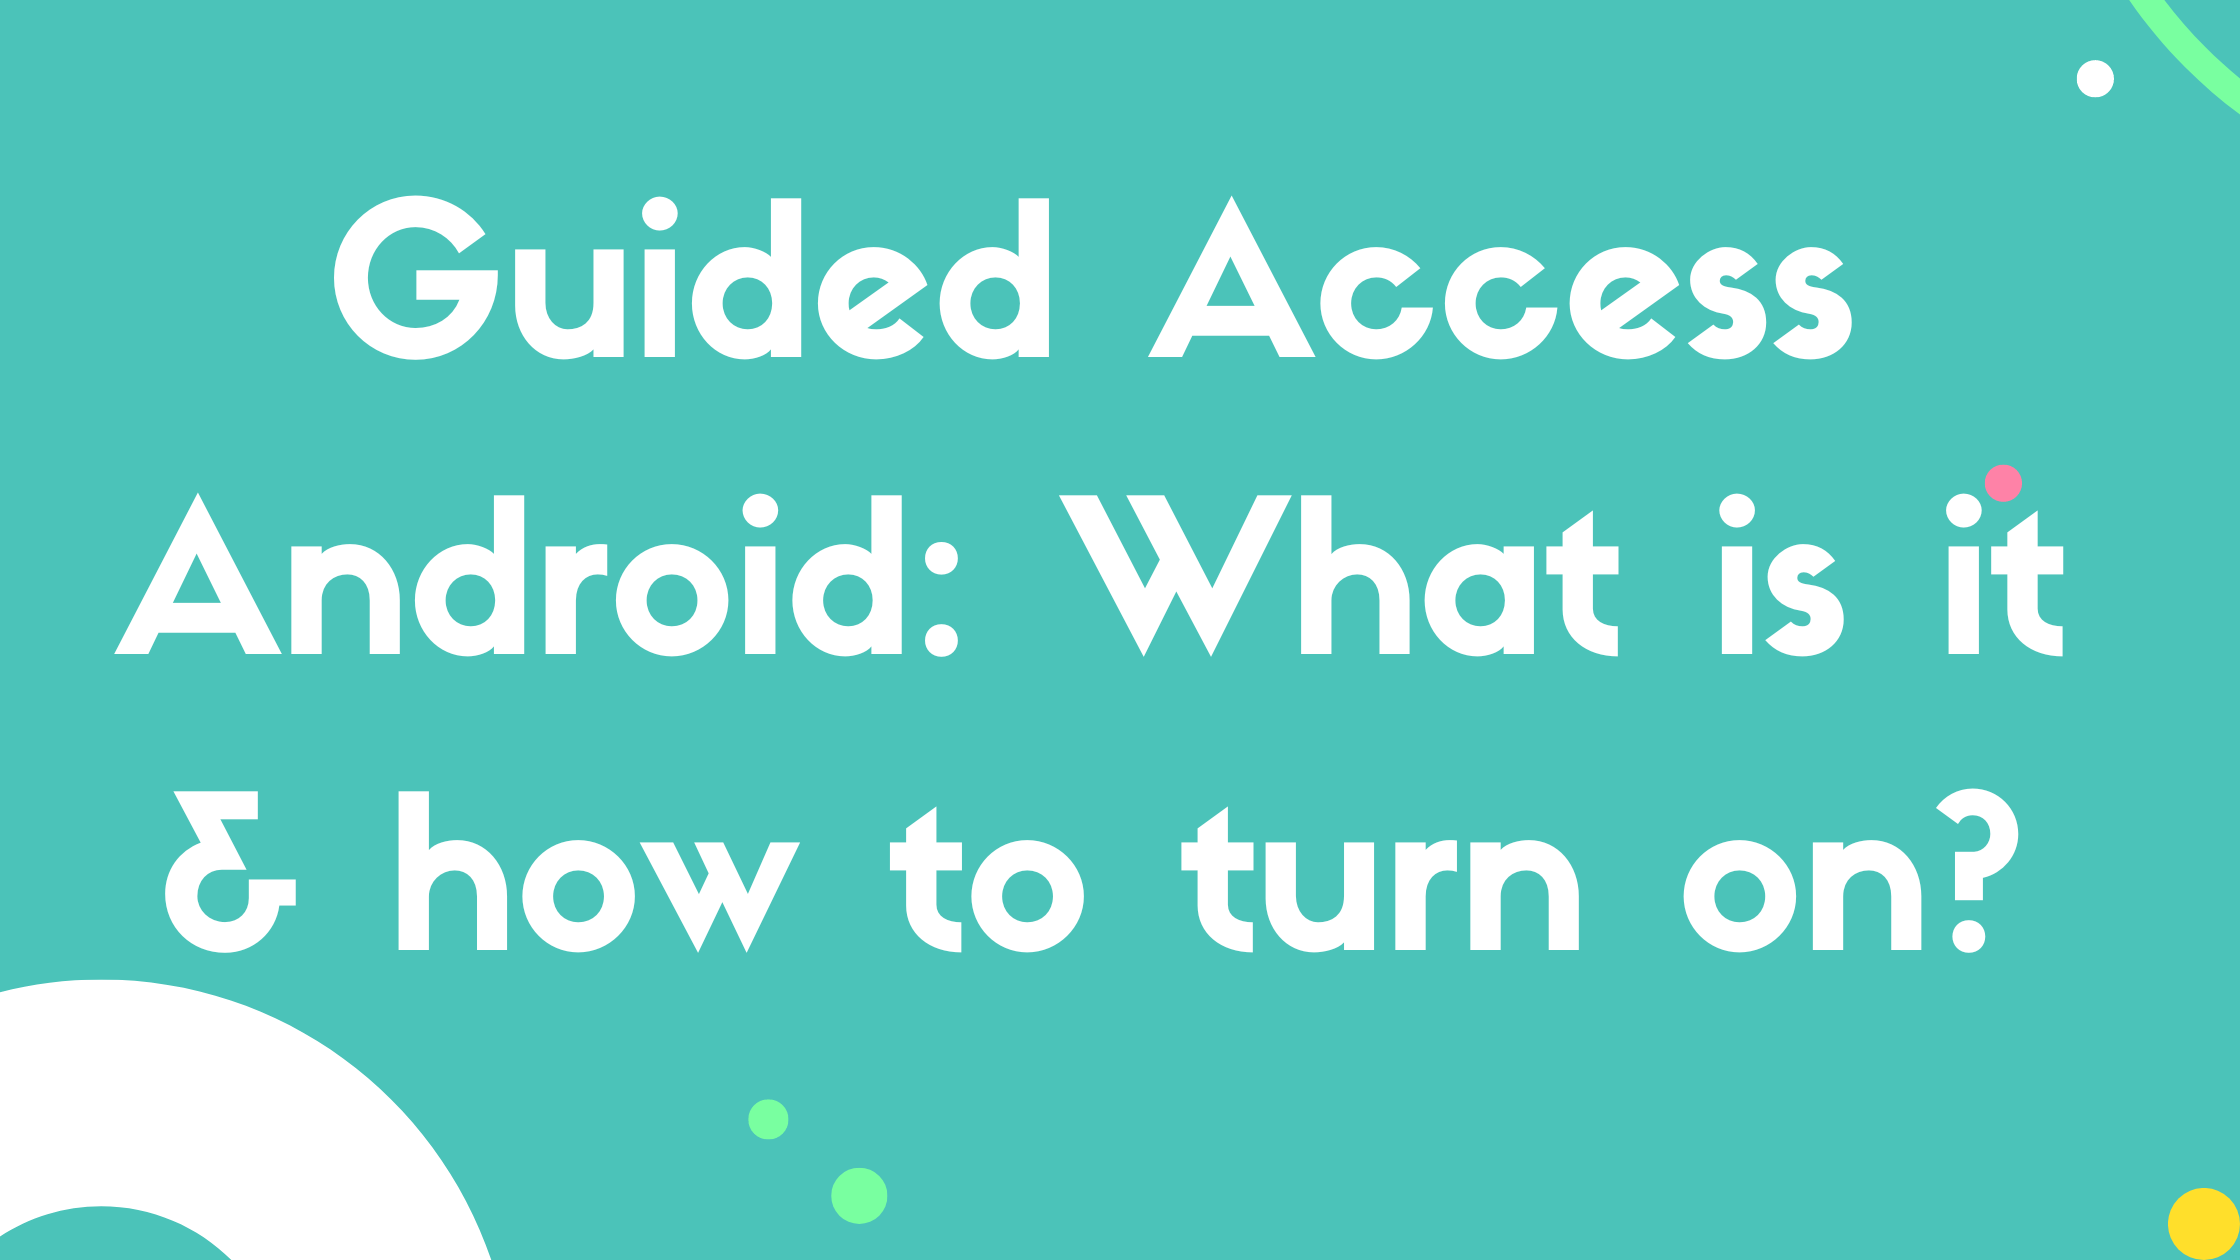 Guided Access Android: What is it & how to turn on?